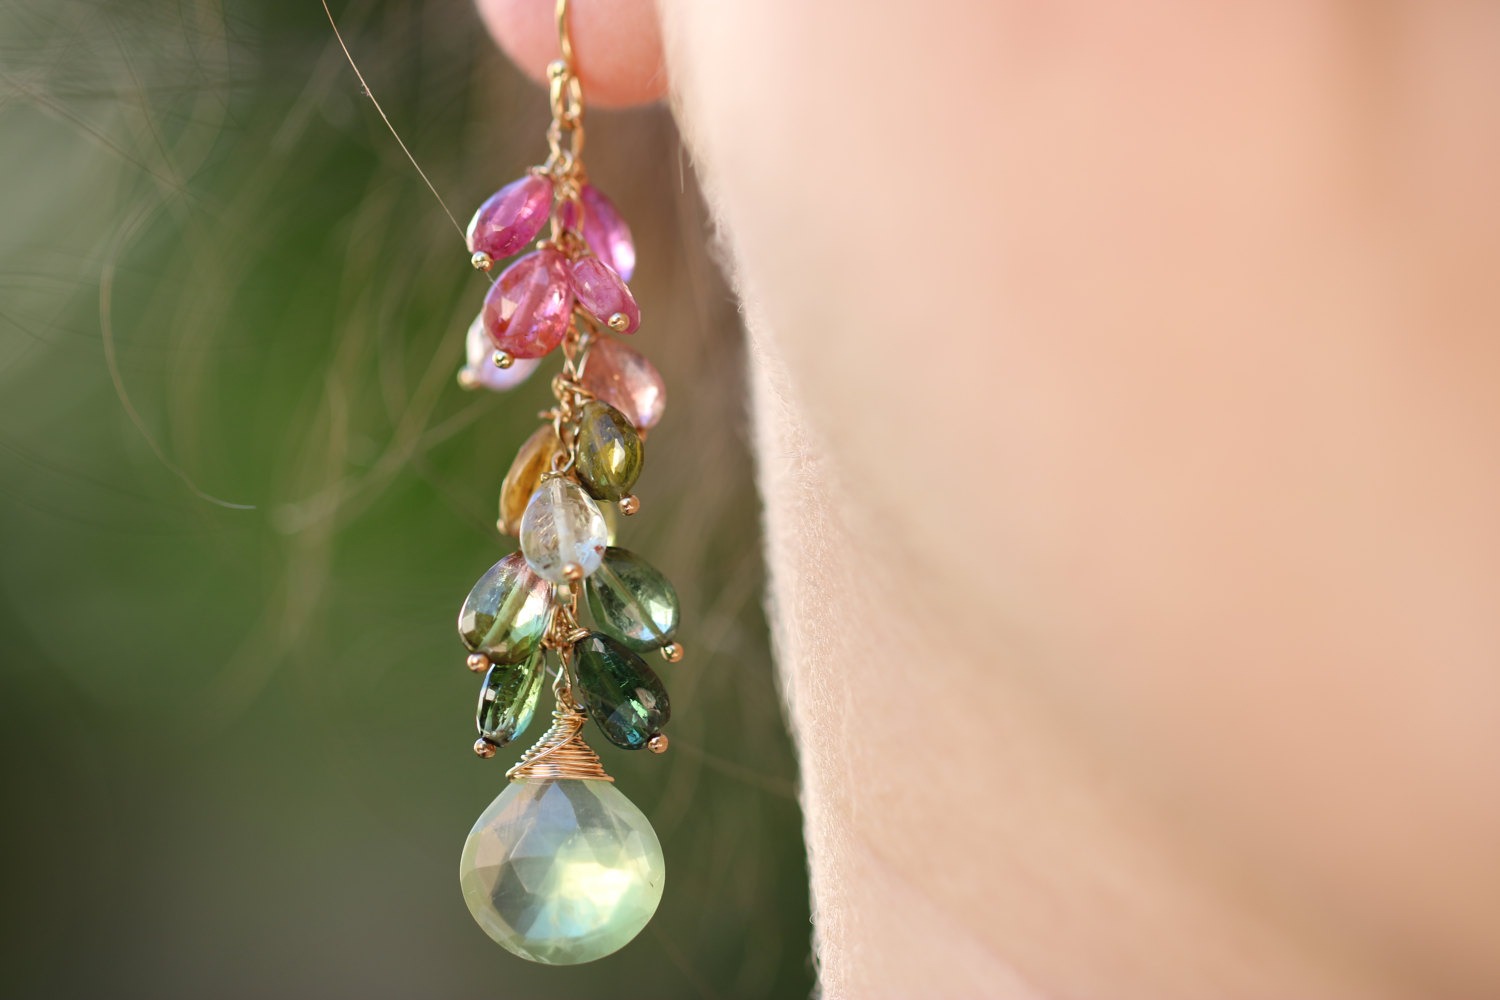 Watermelon Tourmaline Earrings in Gold Filled with Prehnites